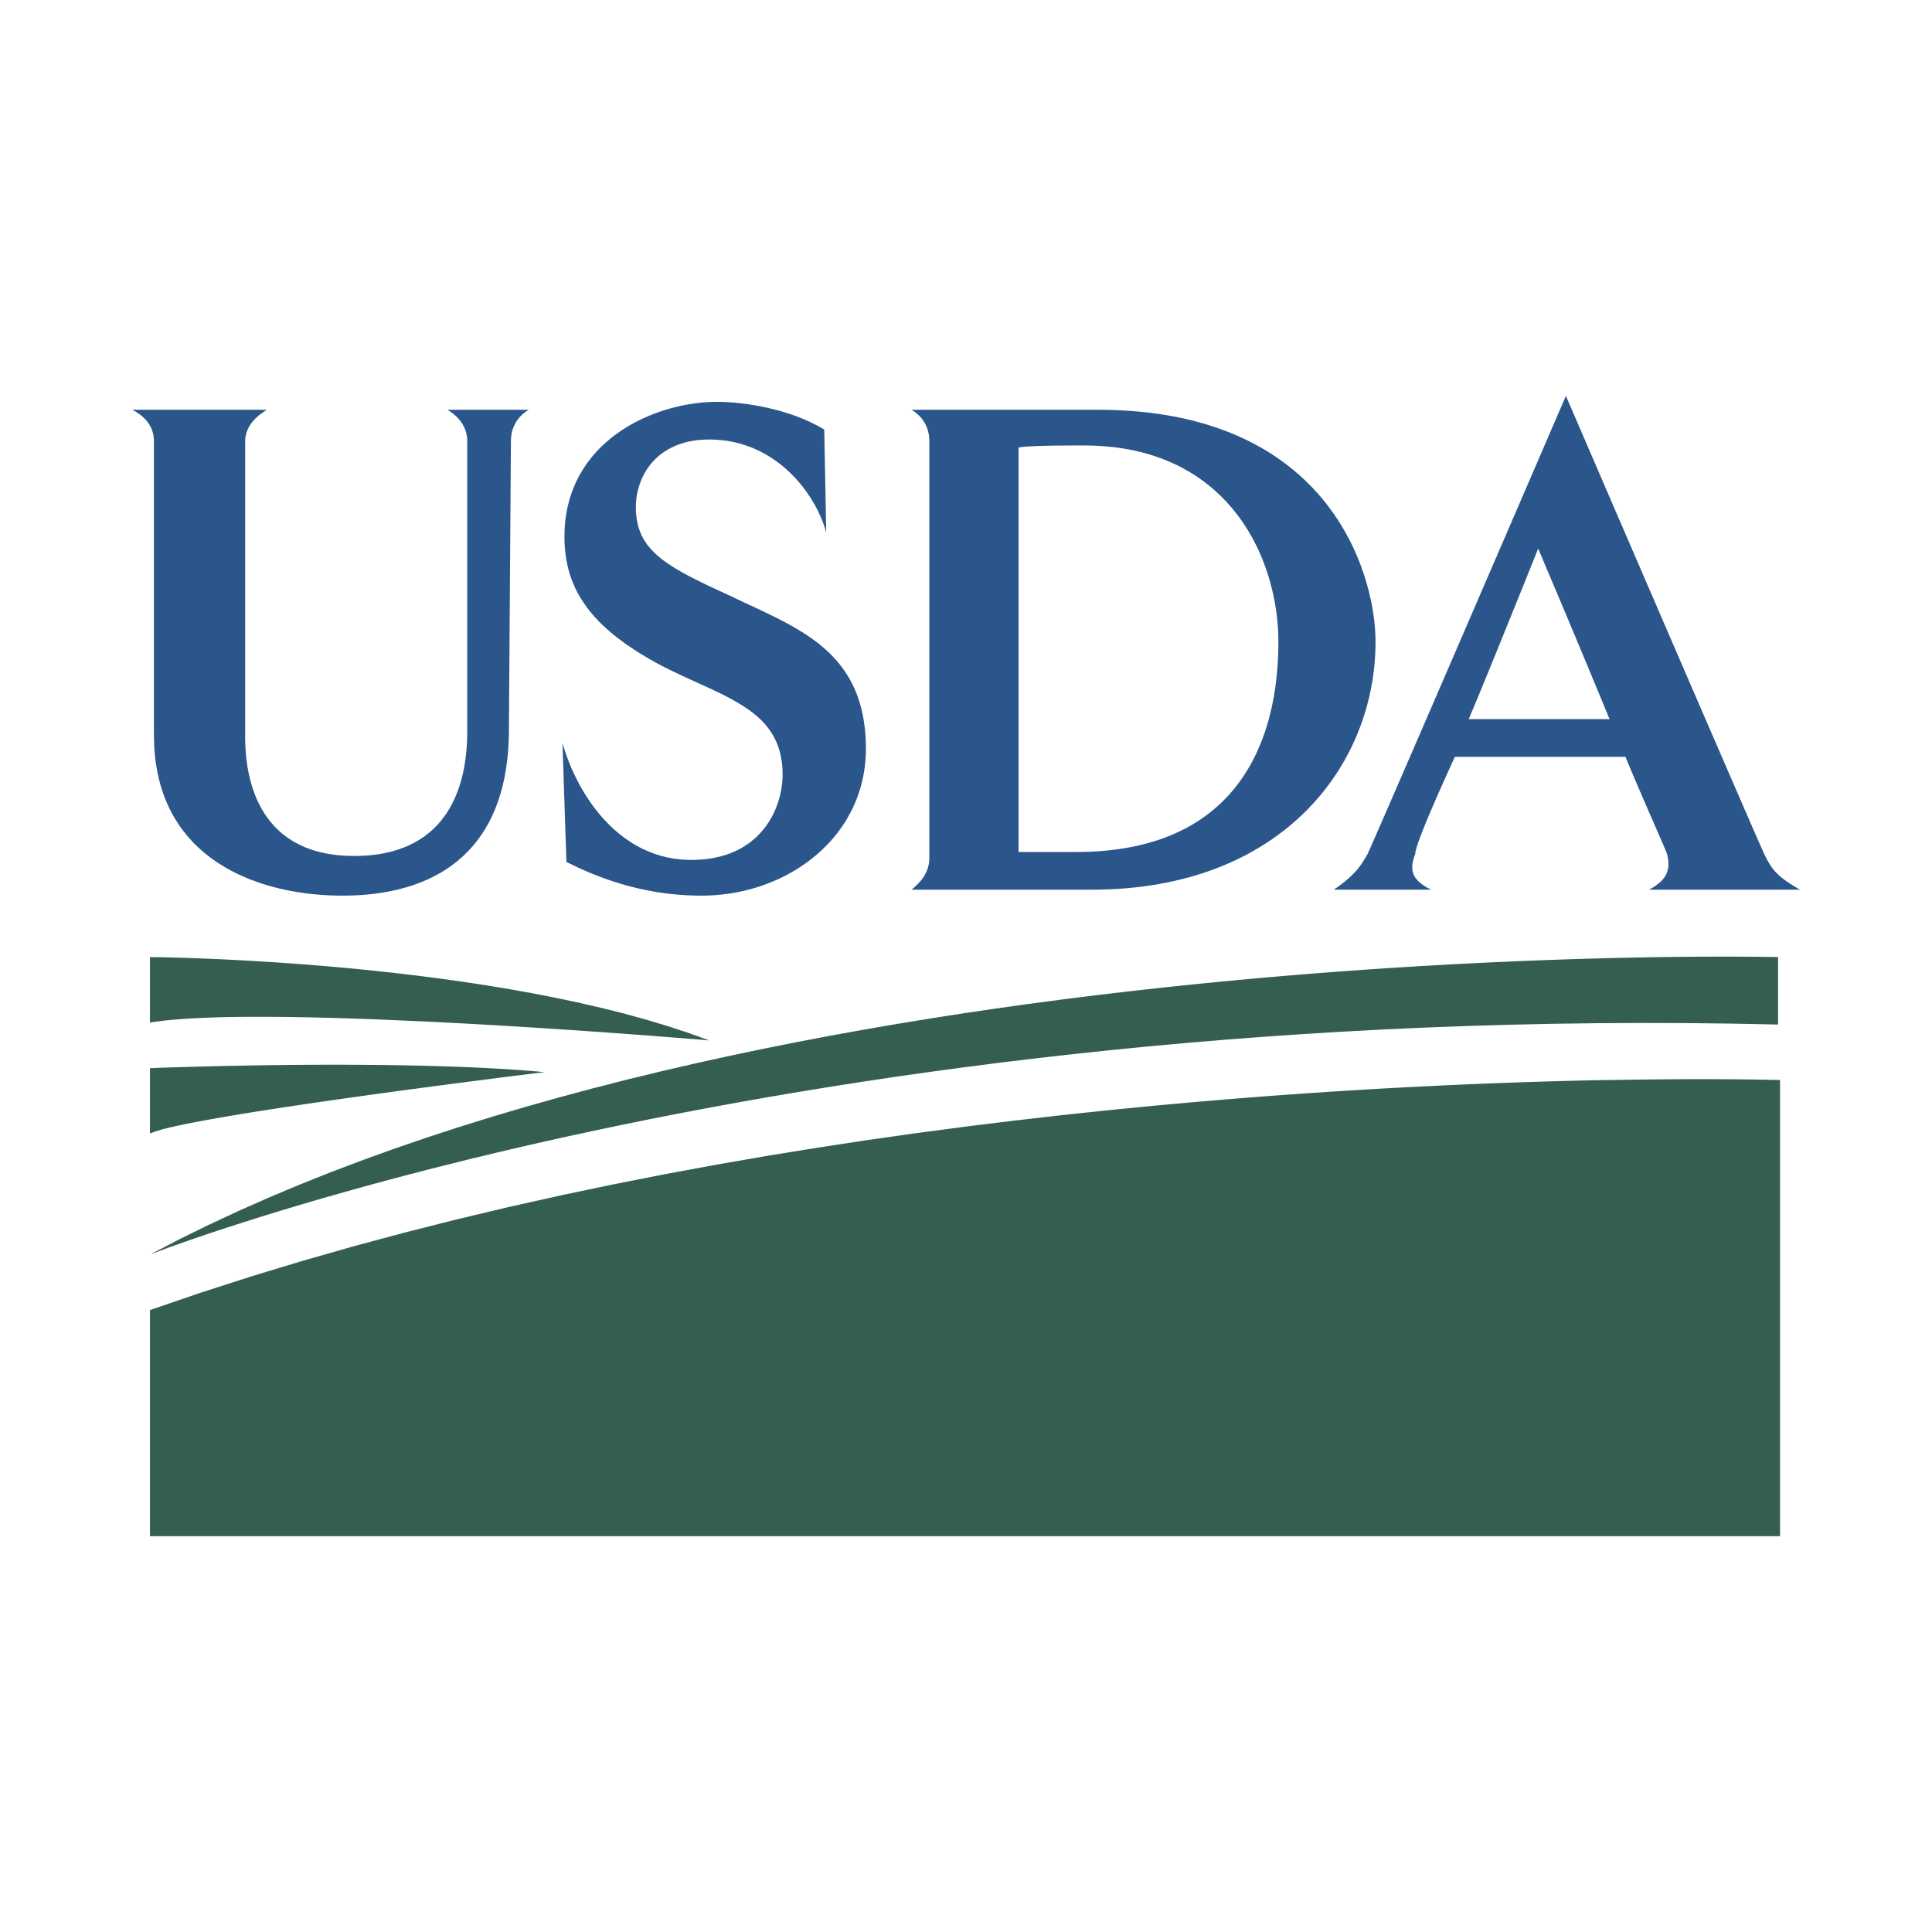 Image of the USDA logo, which is the acronym in dark blue text above dark green arches.